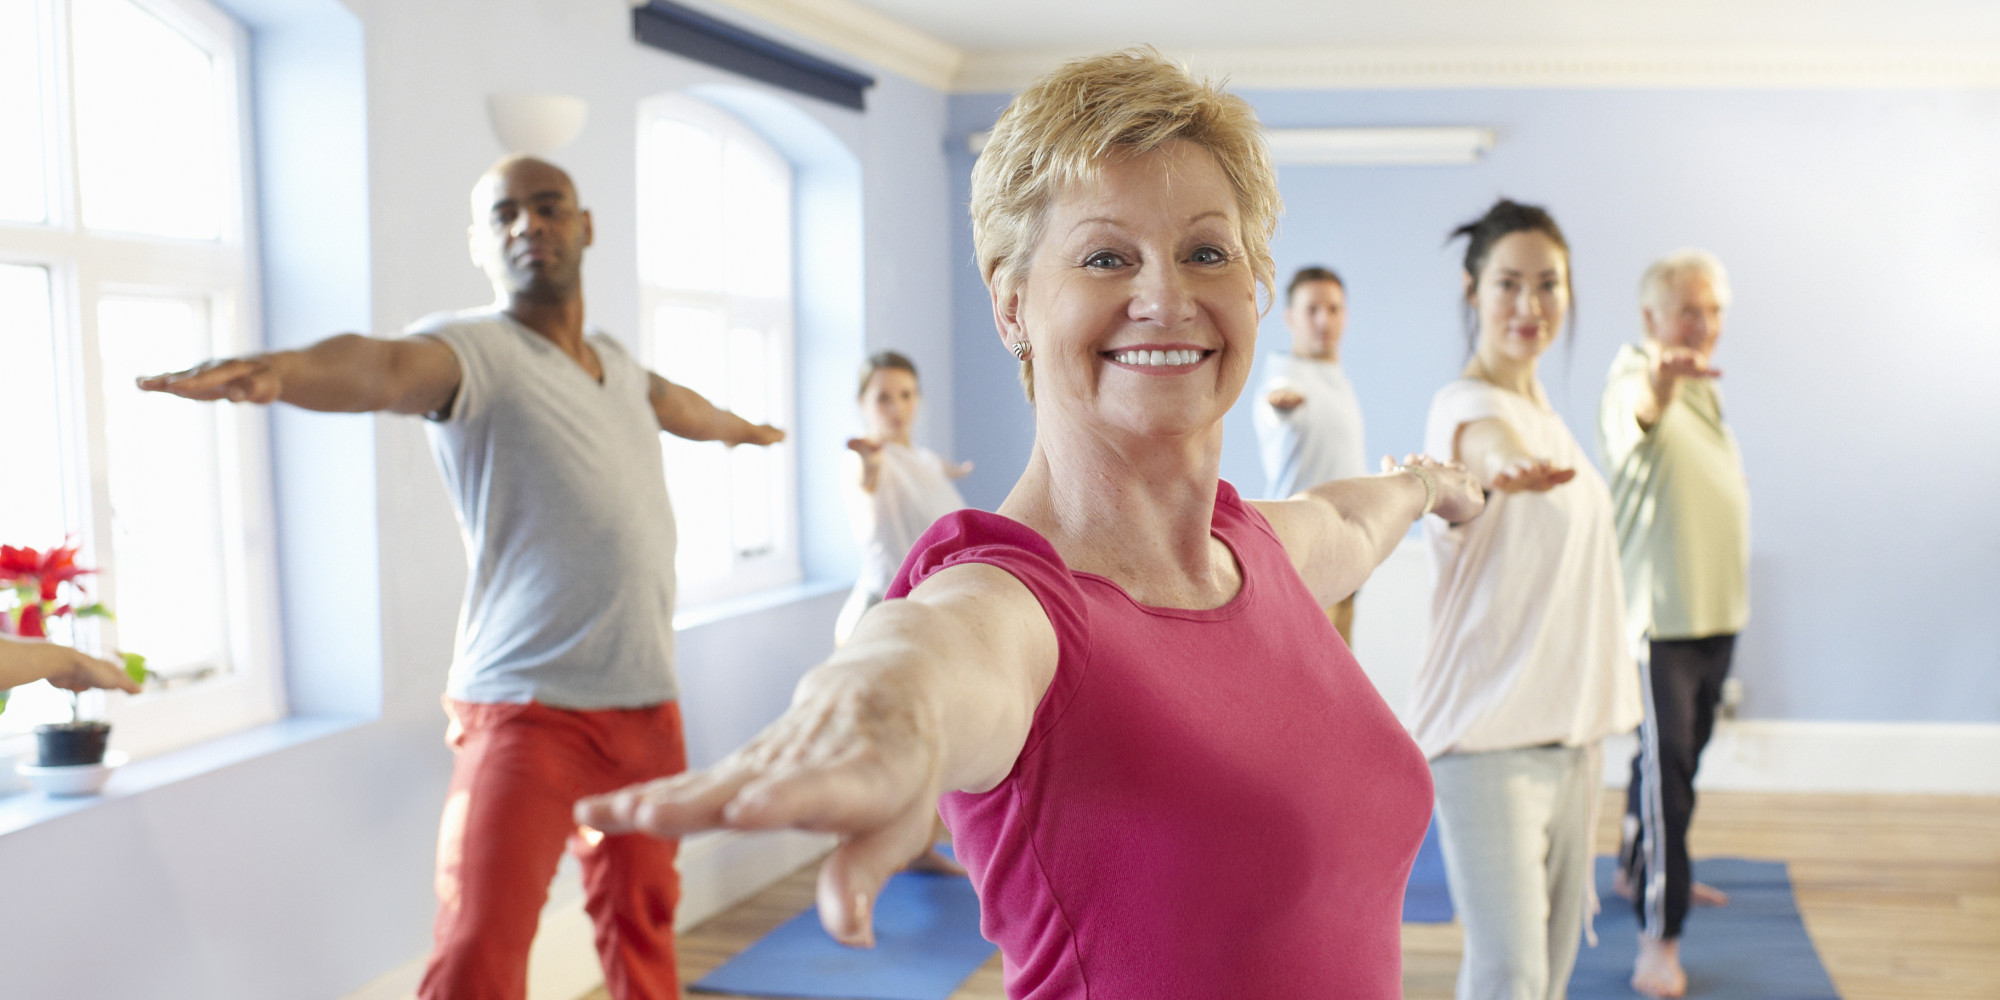 Mature woman at front of exercise class